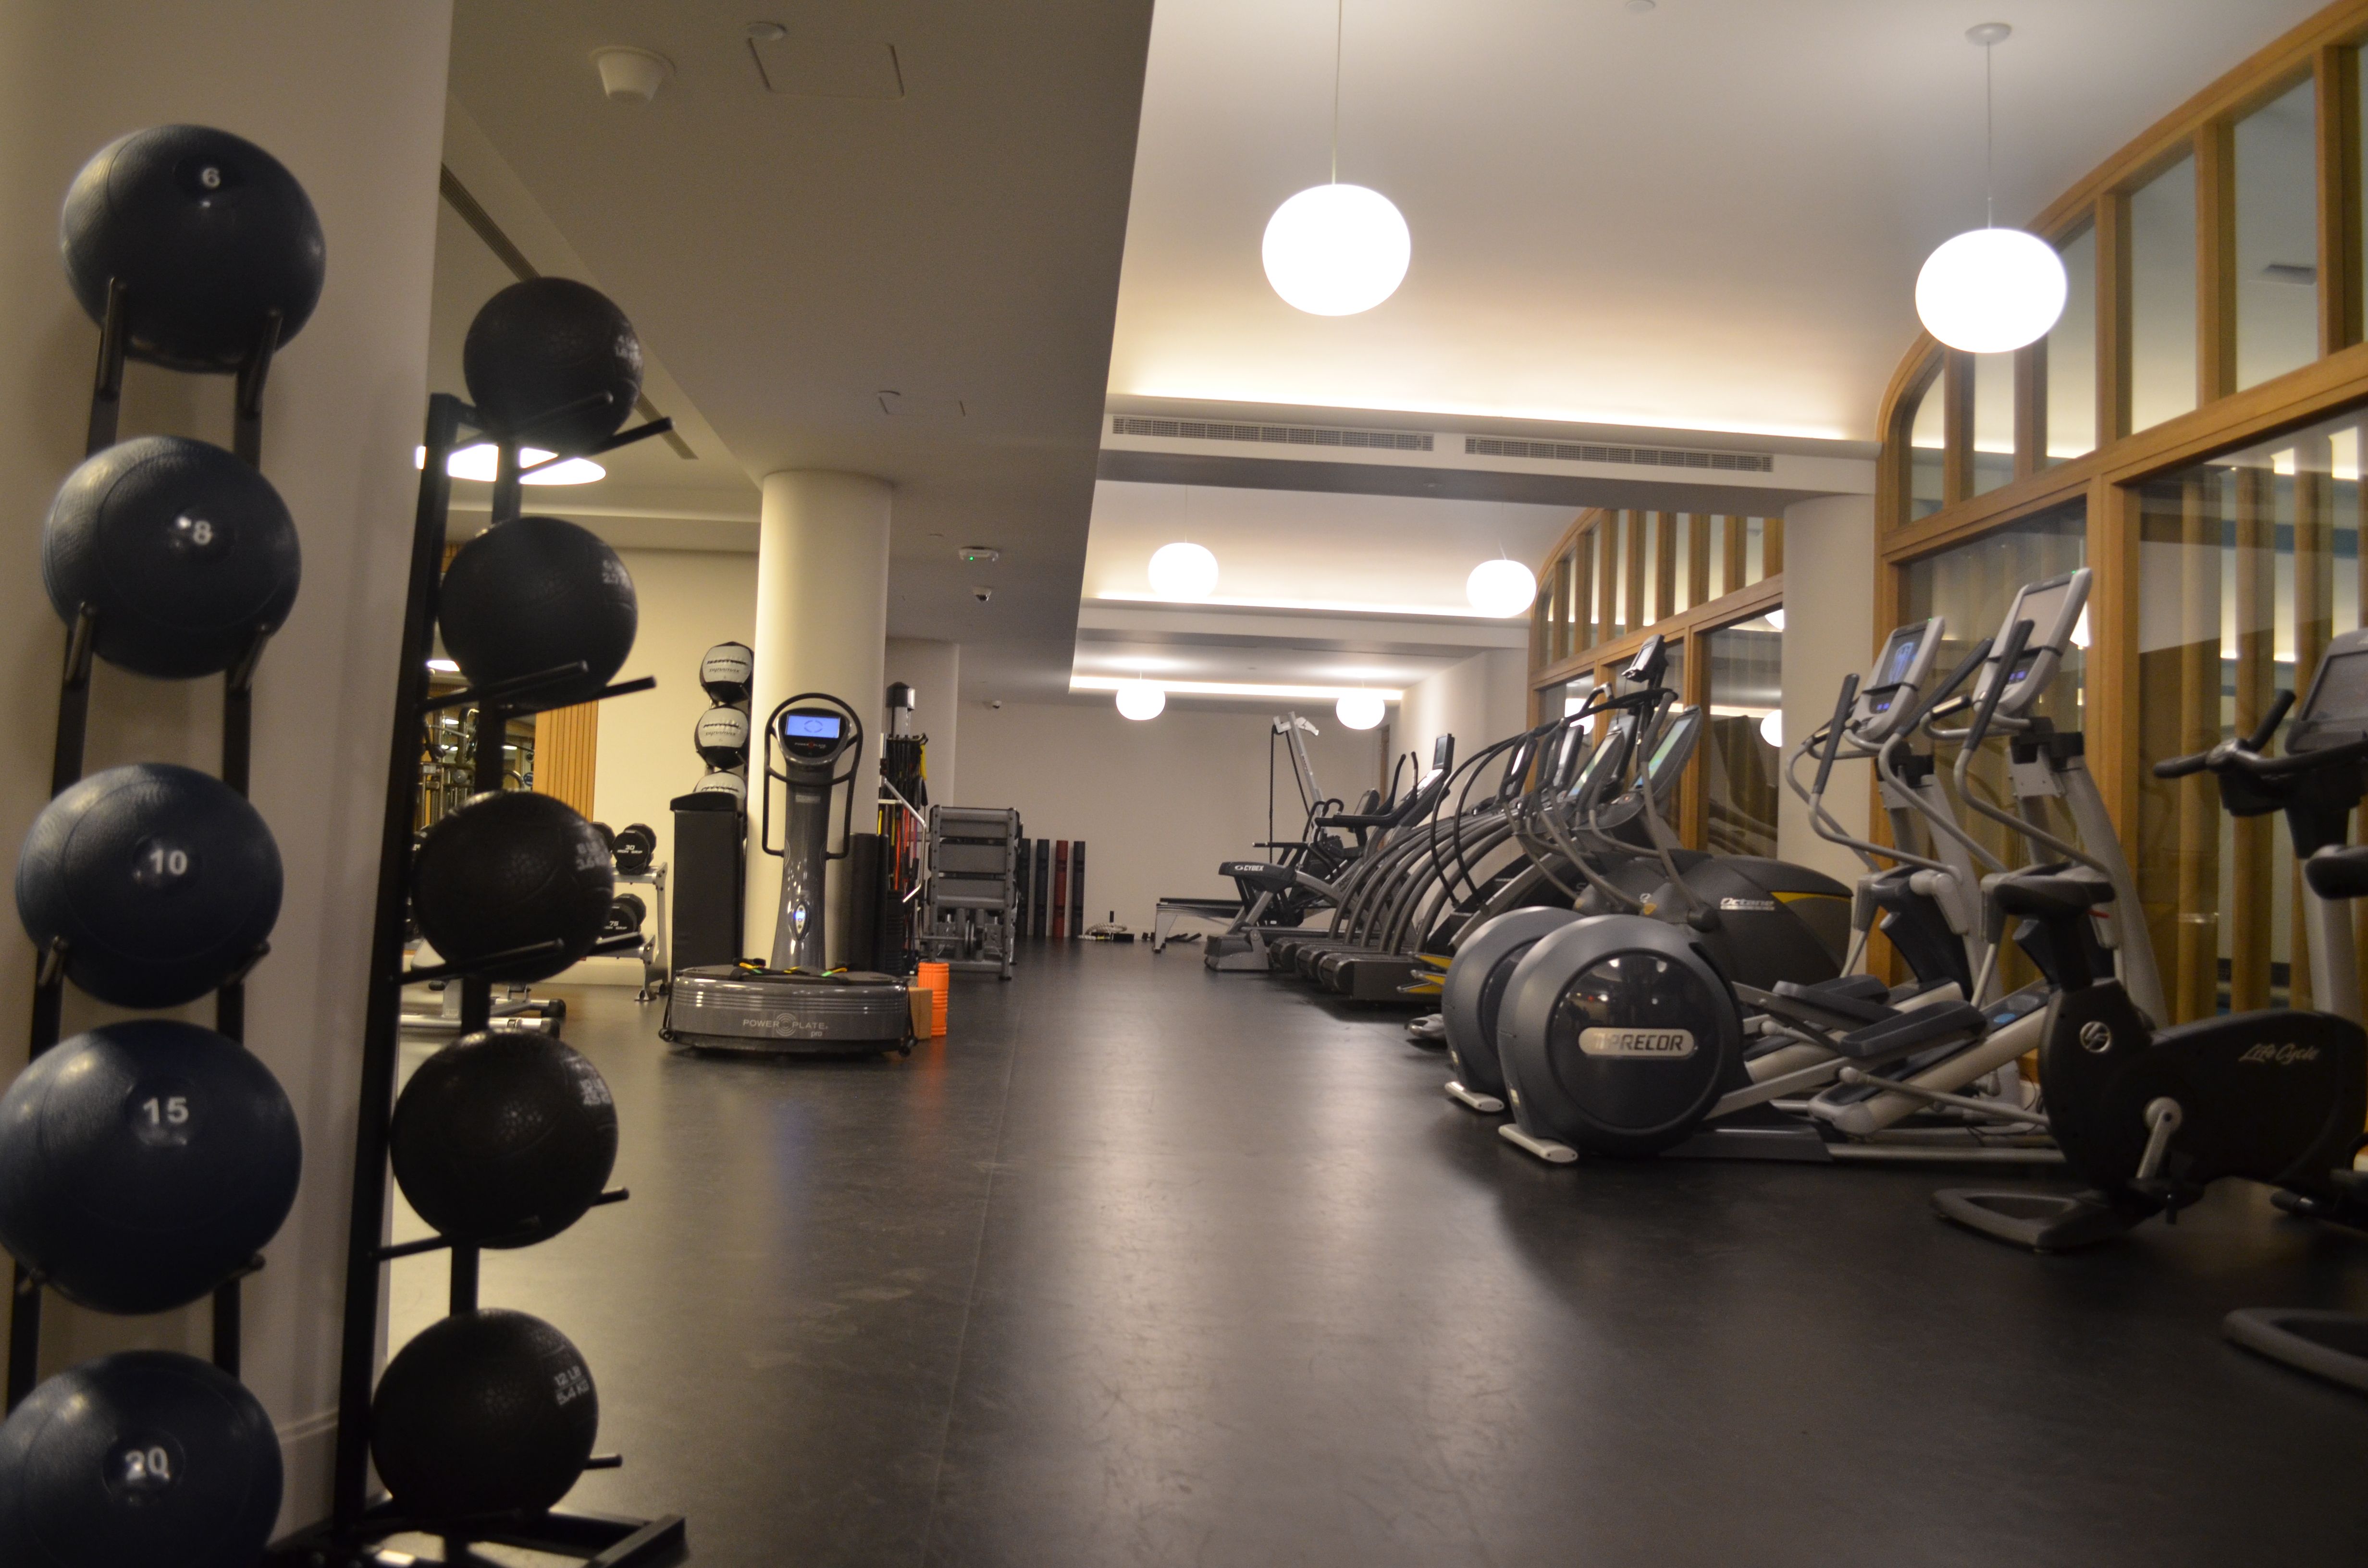 The condo sports a "wellness center" that includes a gym and pool.